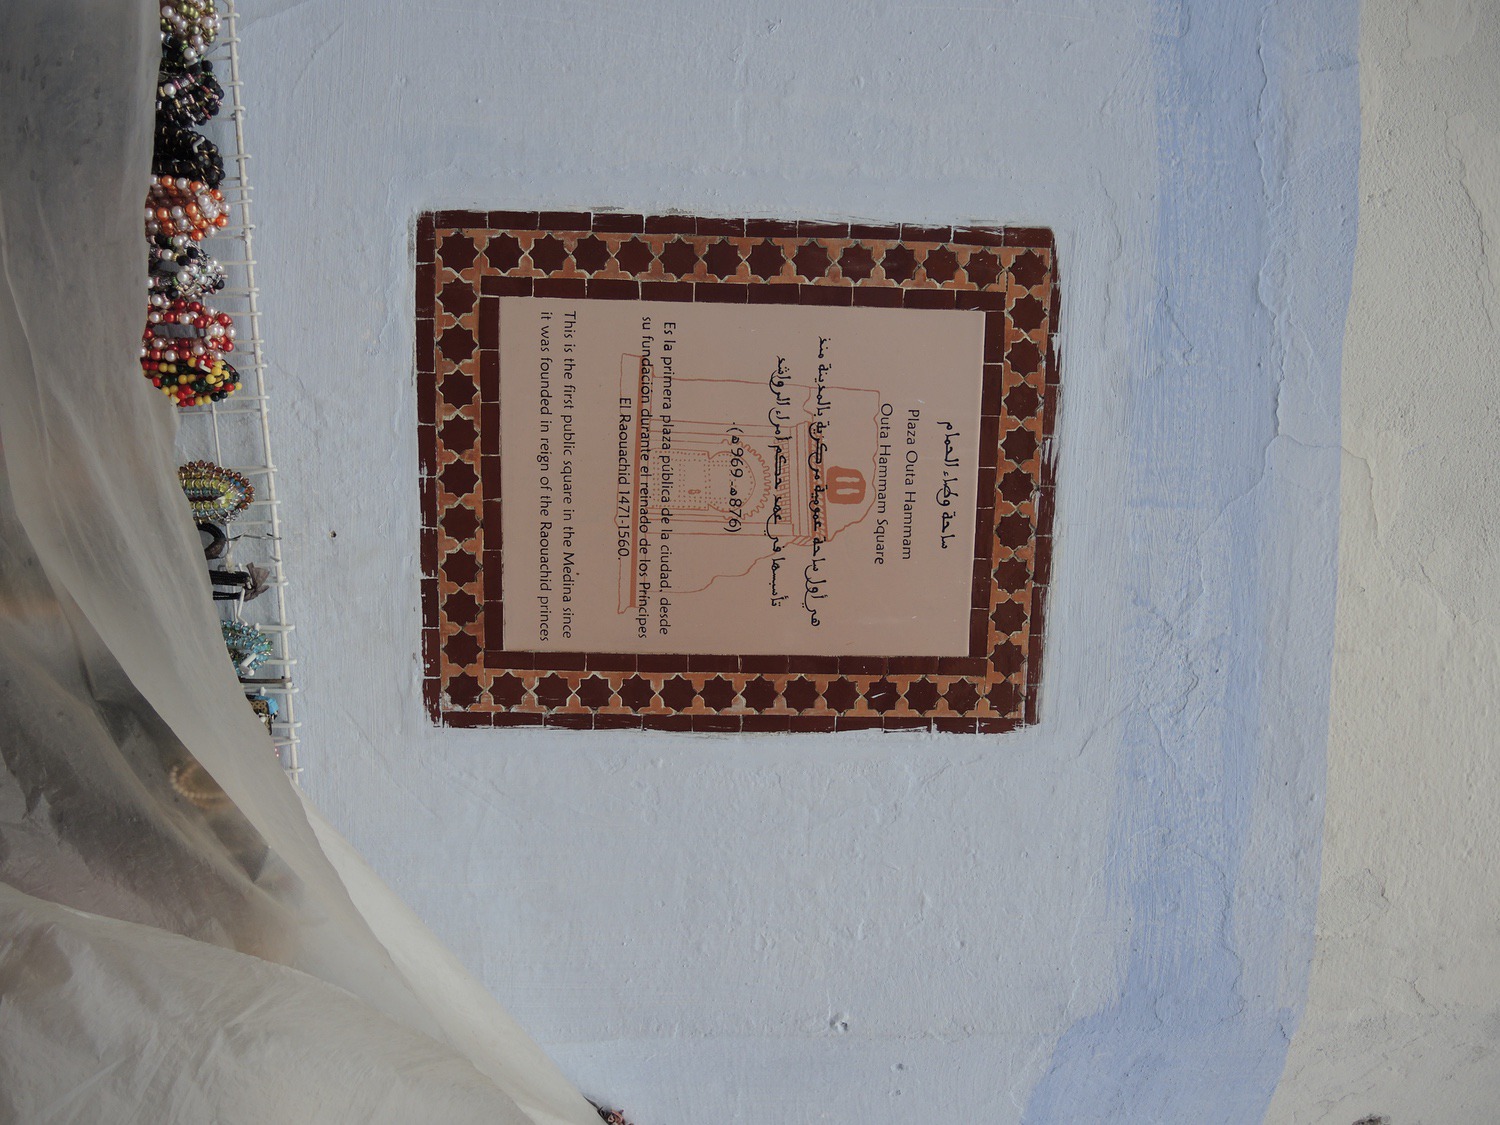 View of an tile with information on the monument attached to the wall